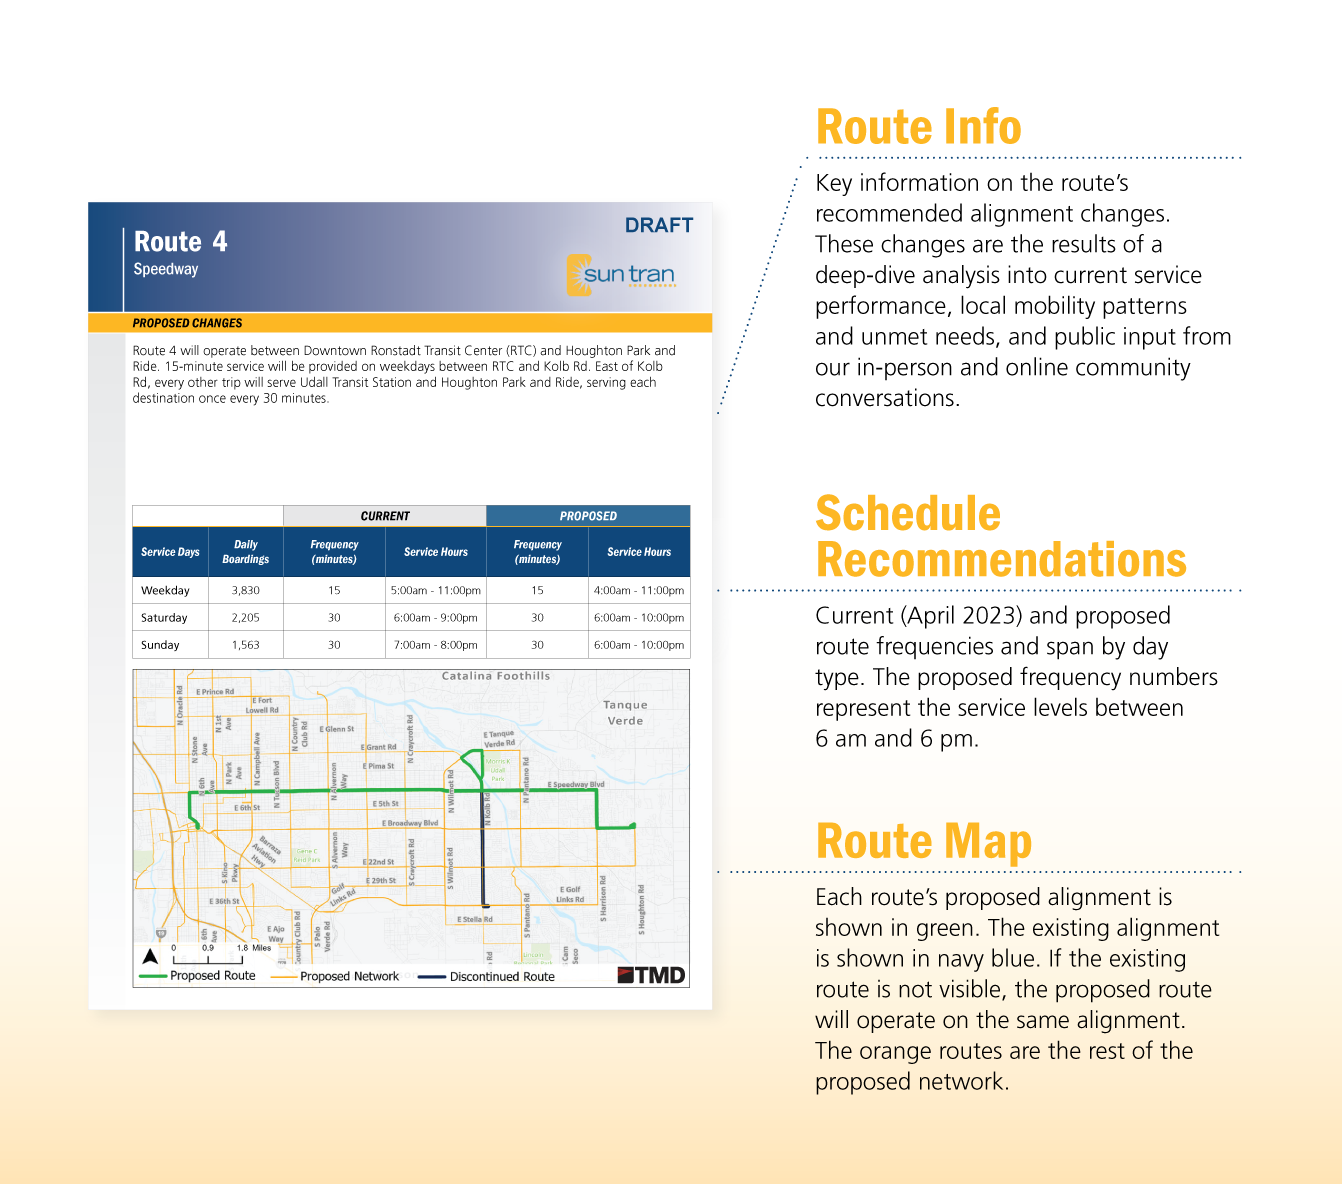 This image highlights how to read the route profile pages. The top part of the page has the route info, the middle part of the page shows schedule recommendations in a table format and the bottom part of the page shows the route map with alignment details. 